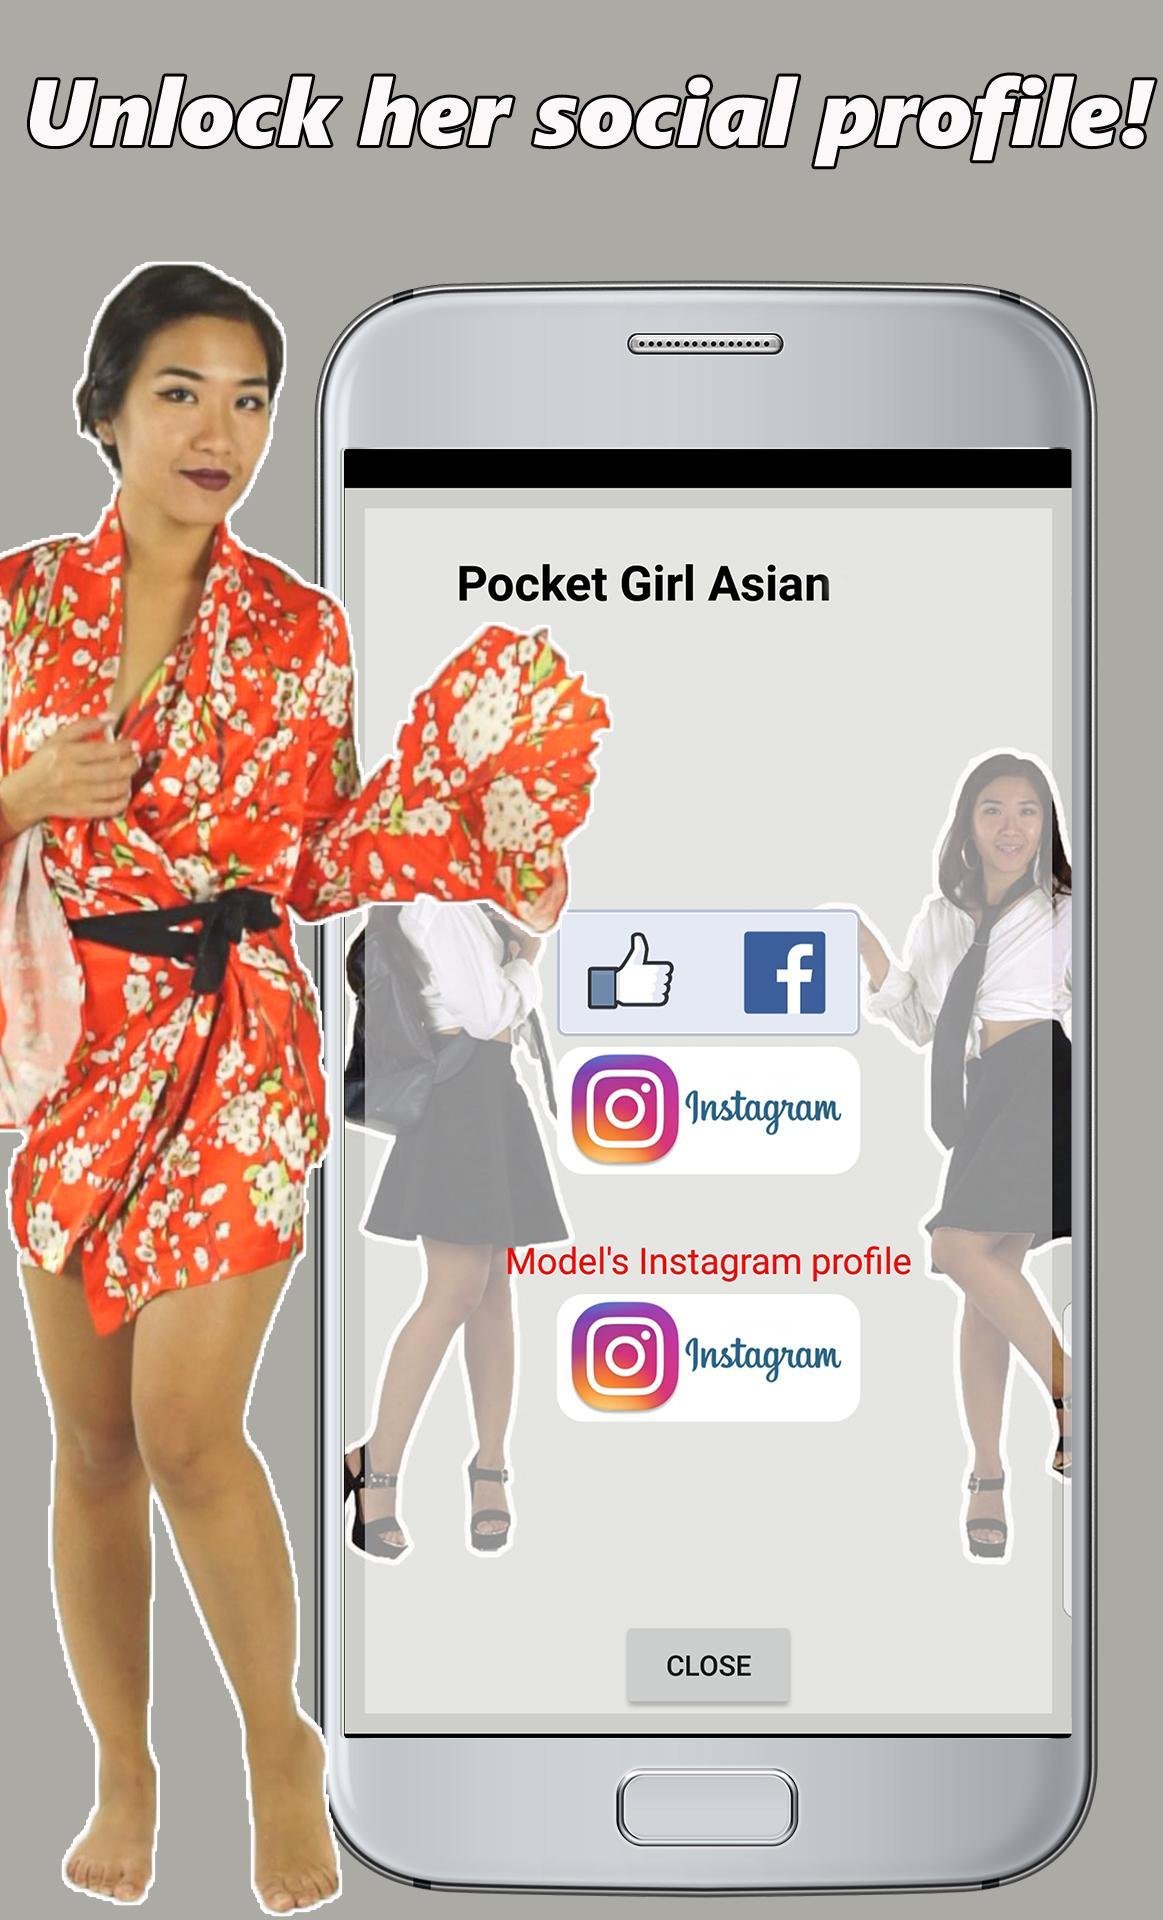 Nude Pocket Girl Free App Download - My Pocket Girl Asian Nude - 81 photo